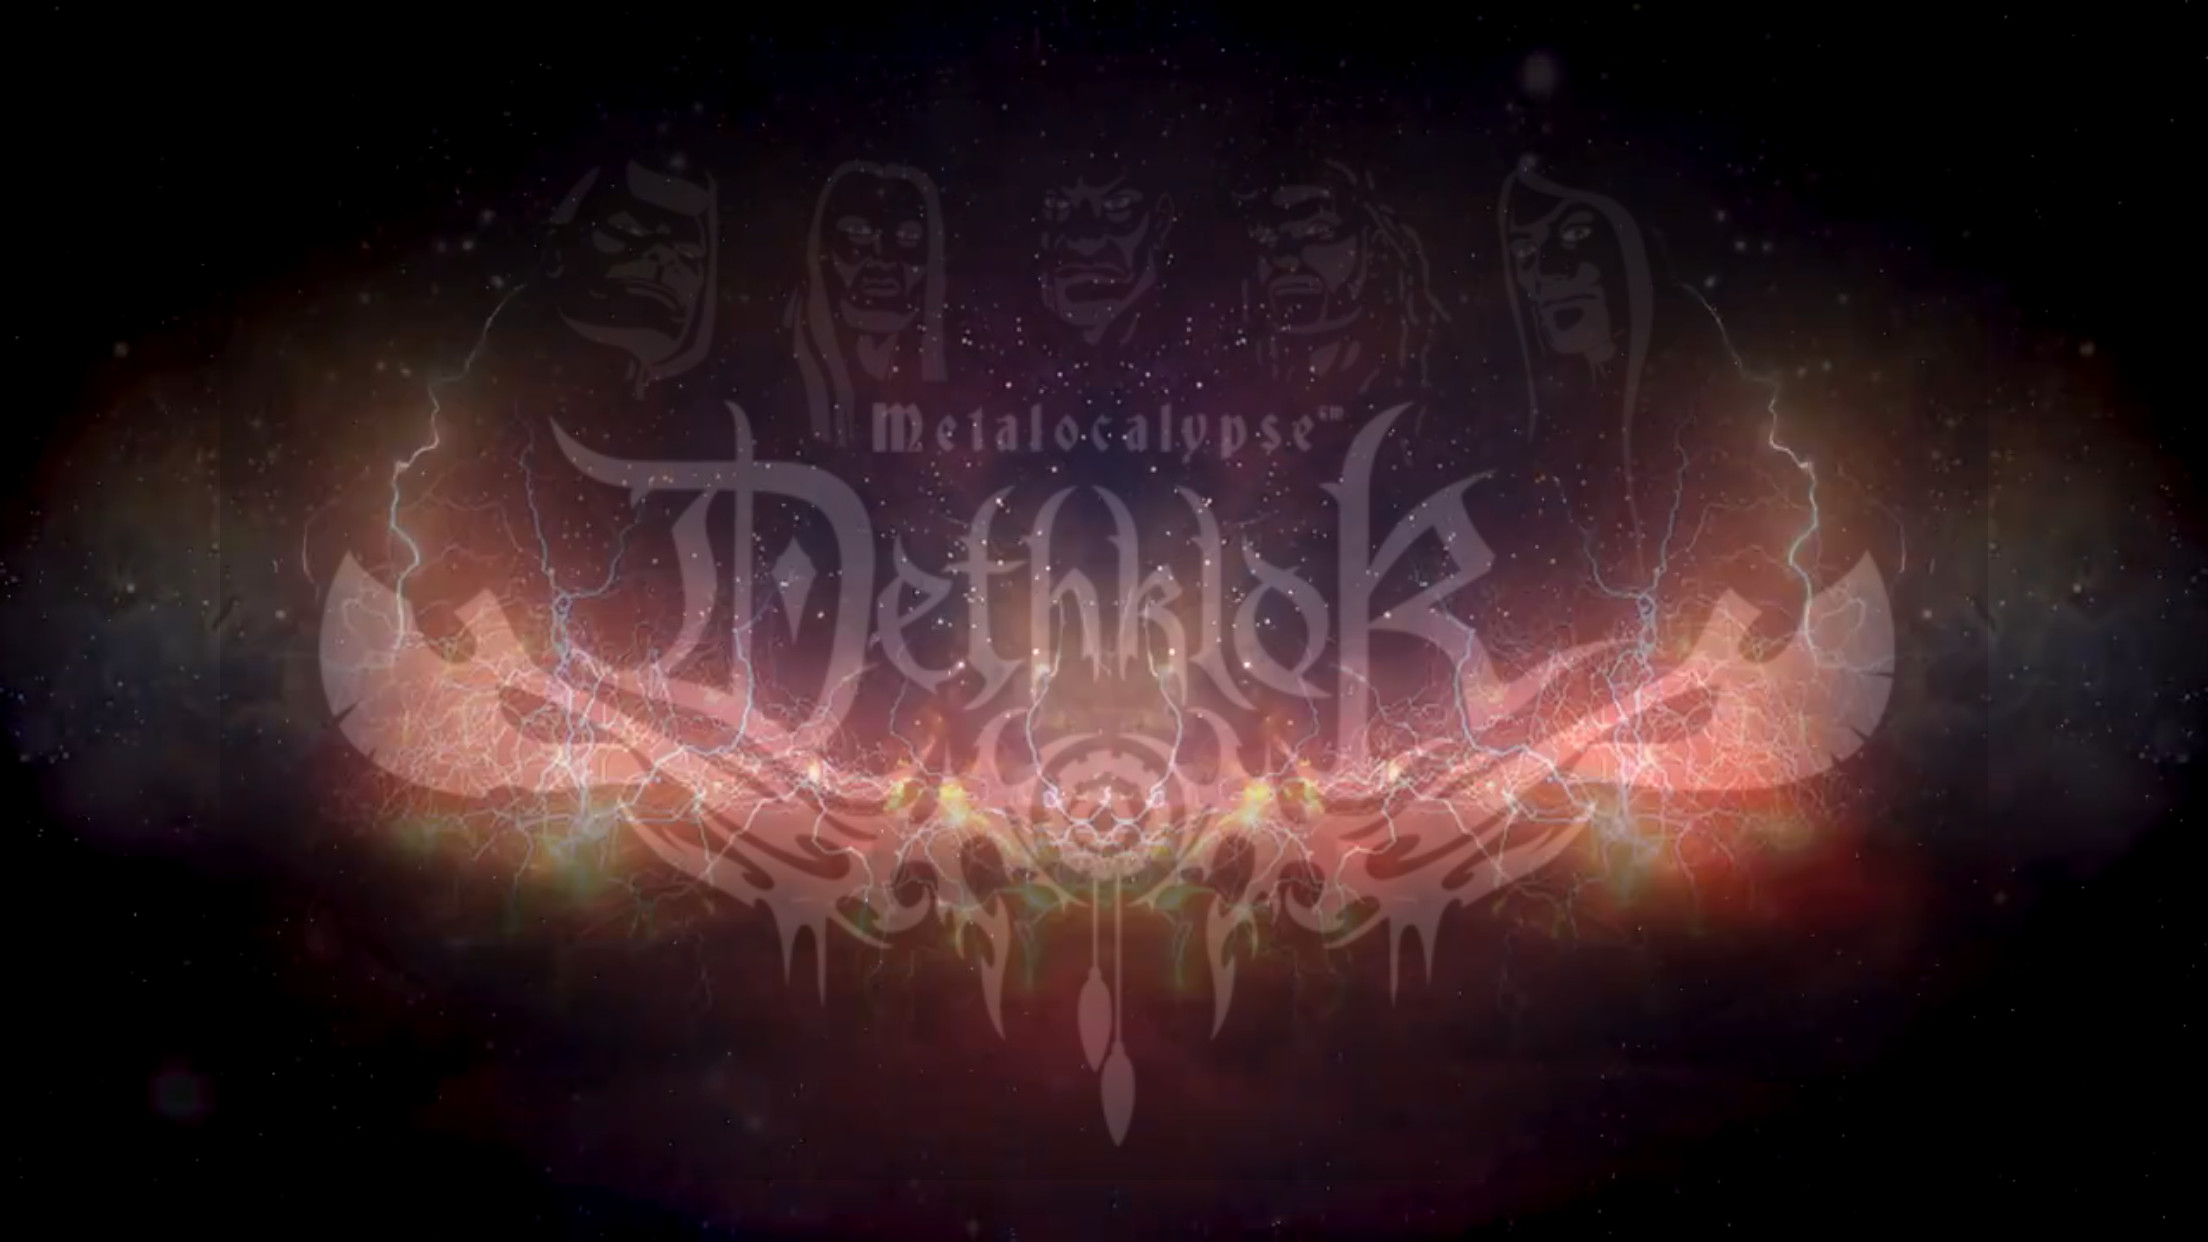 2208x1242 But anyway here's a Dethklok ribute video I made using a Galaktikon II  song... http://www.youtube.com/watch?v=pV-pAsQQVr4